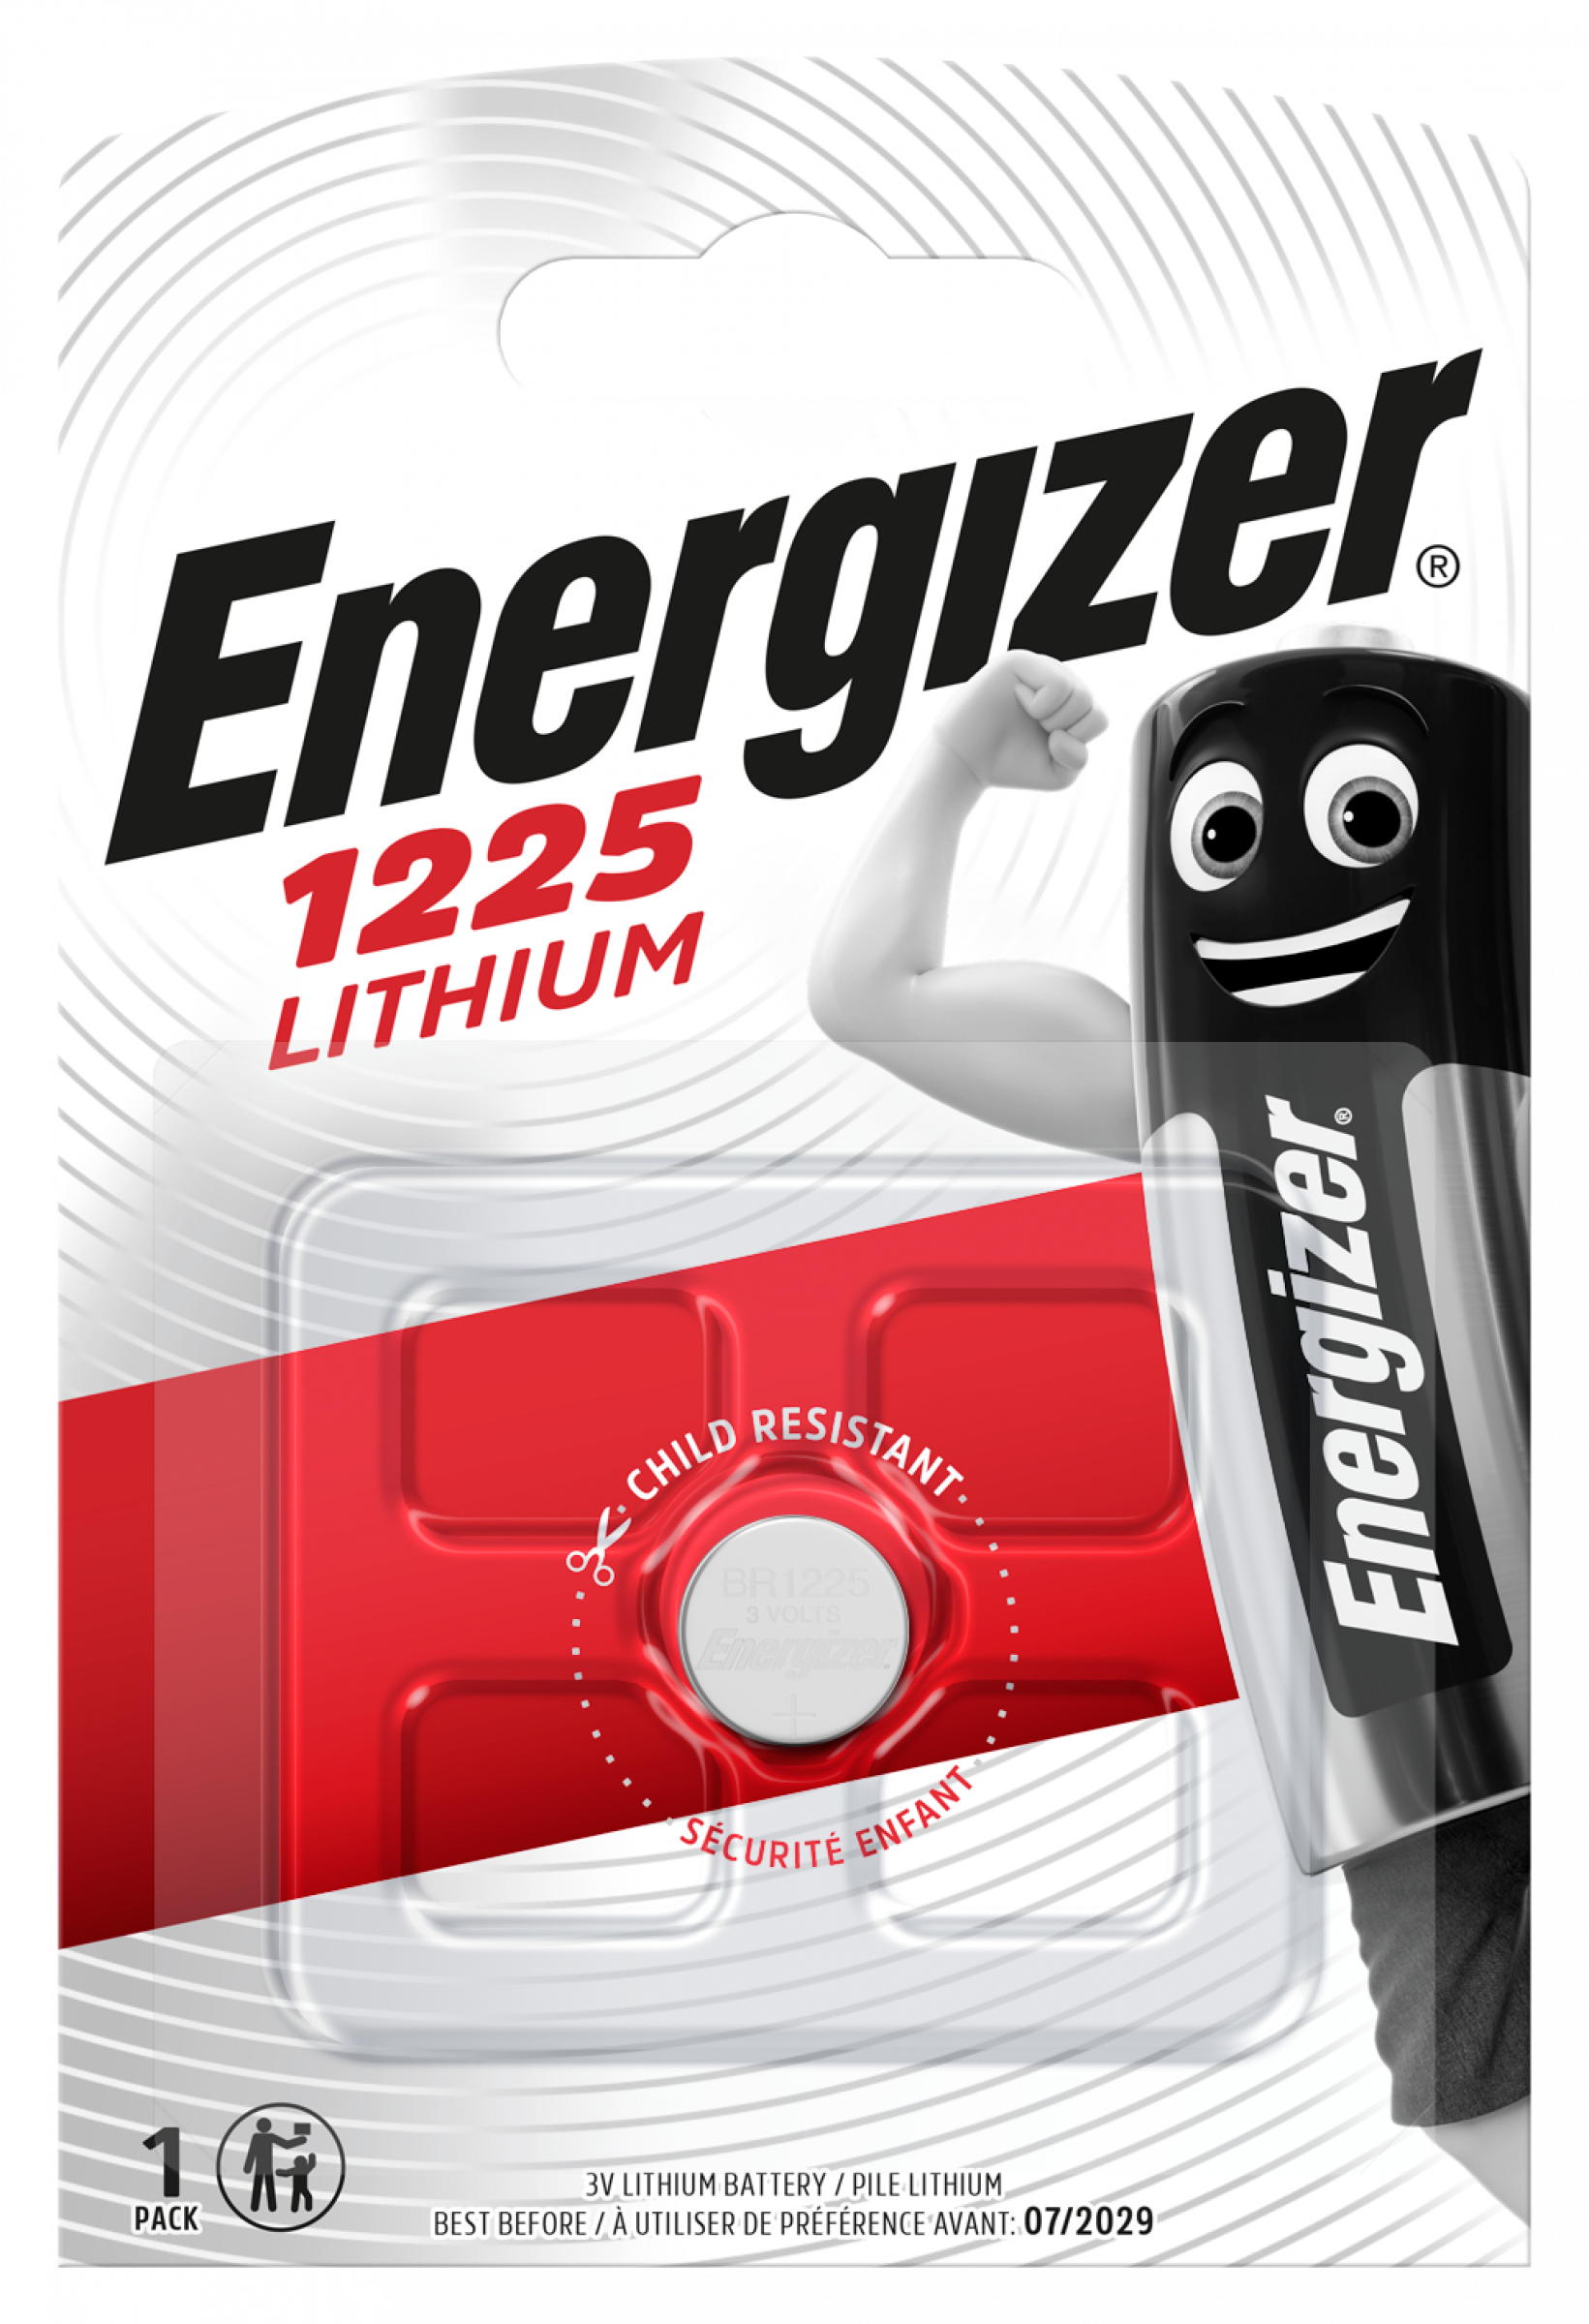 Energizer Lithium-Button-Cell BR 1225 3V 1s-Blister